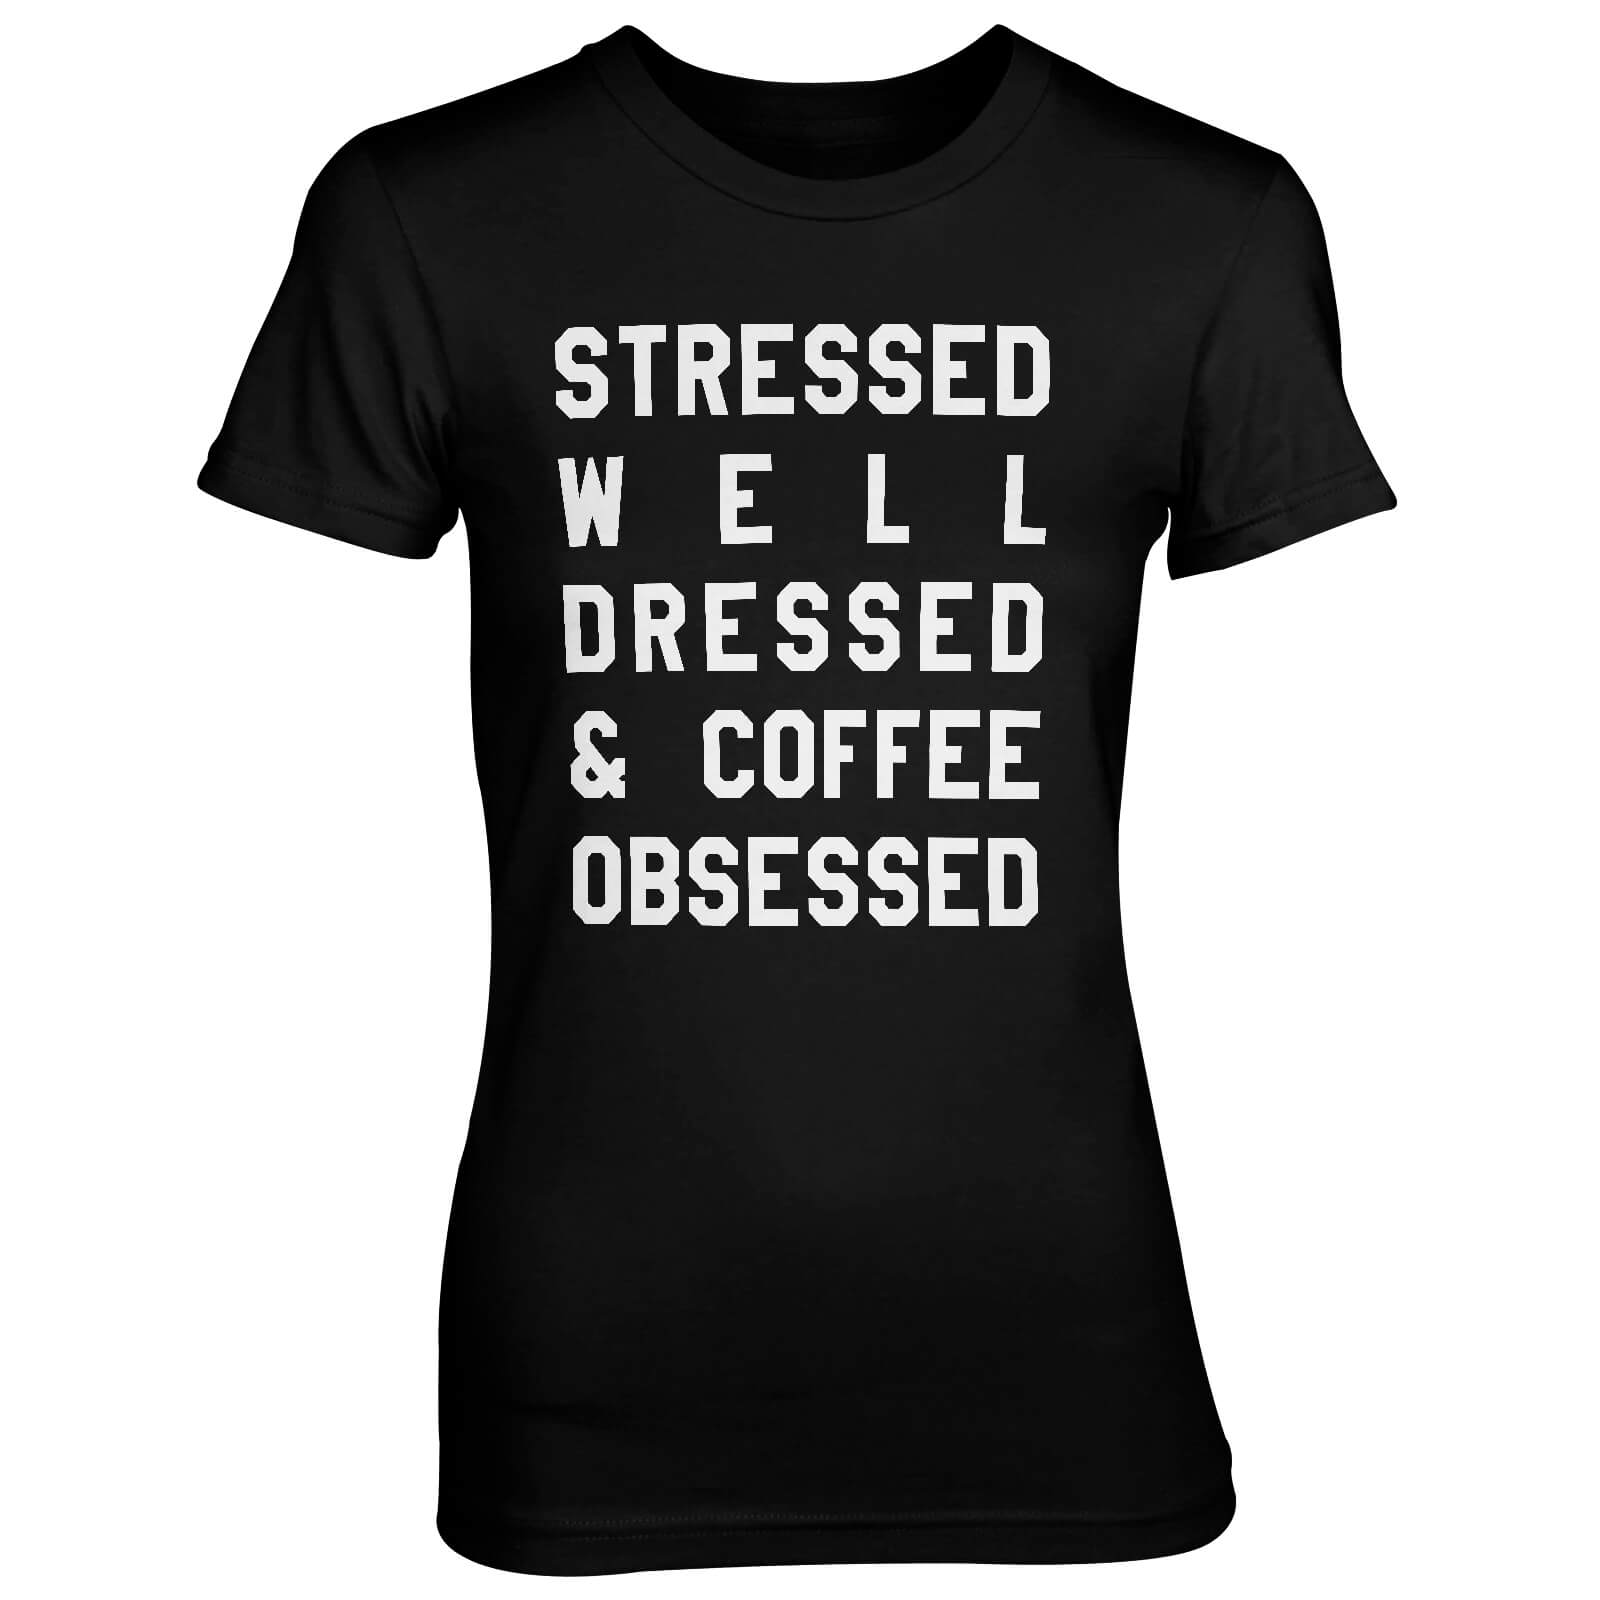 Stressed Well Dressed And Coffee Obsessed Women's Black T-Shirt - S - Black